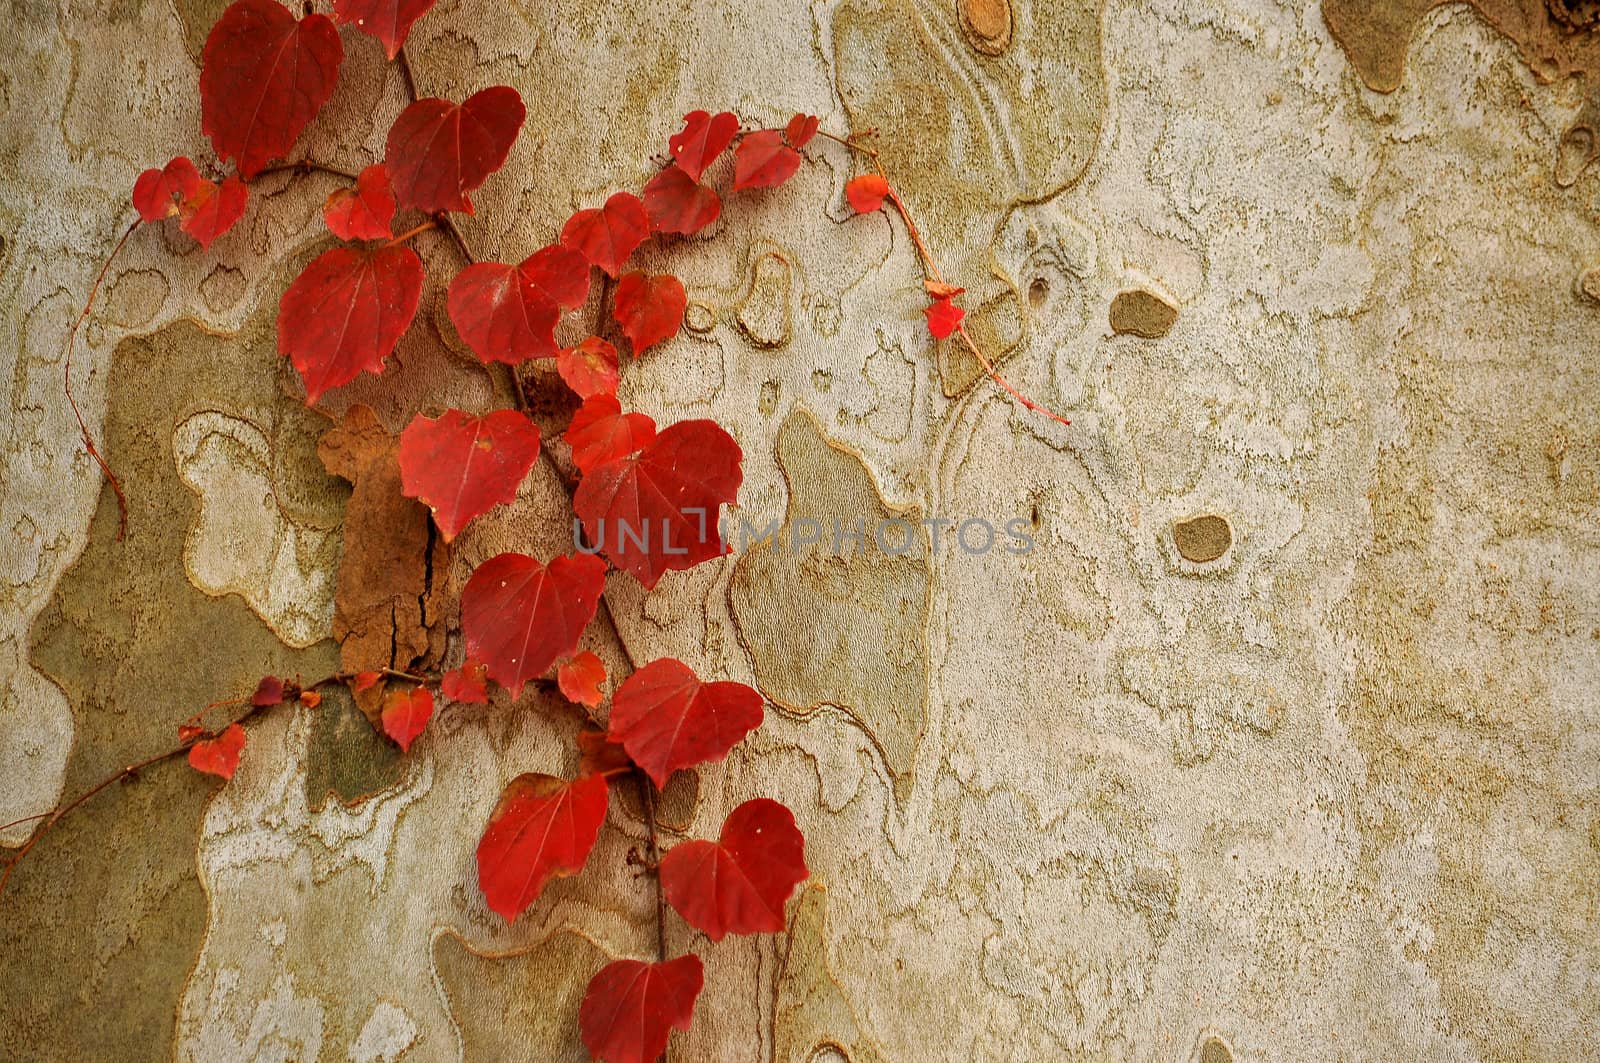 Abstract of Red Leaves on Grayish Bark by jkraft5